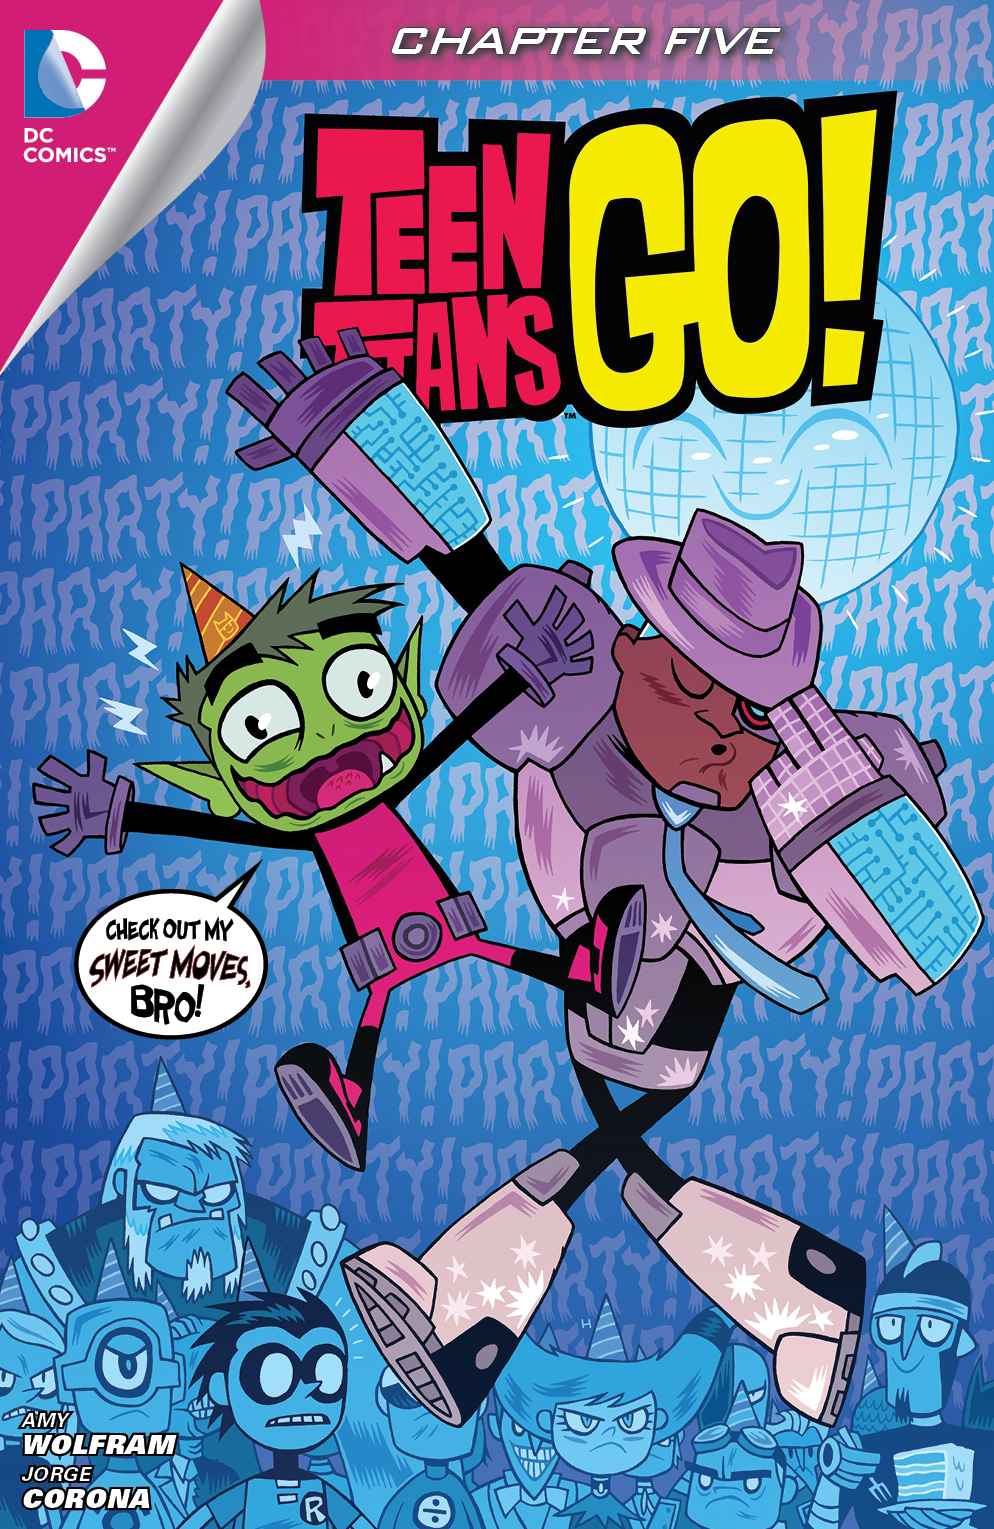 Teen Titans Go! (2013-) #5 preview images